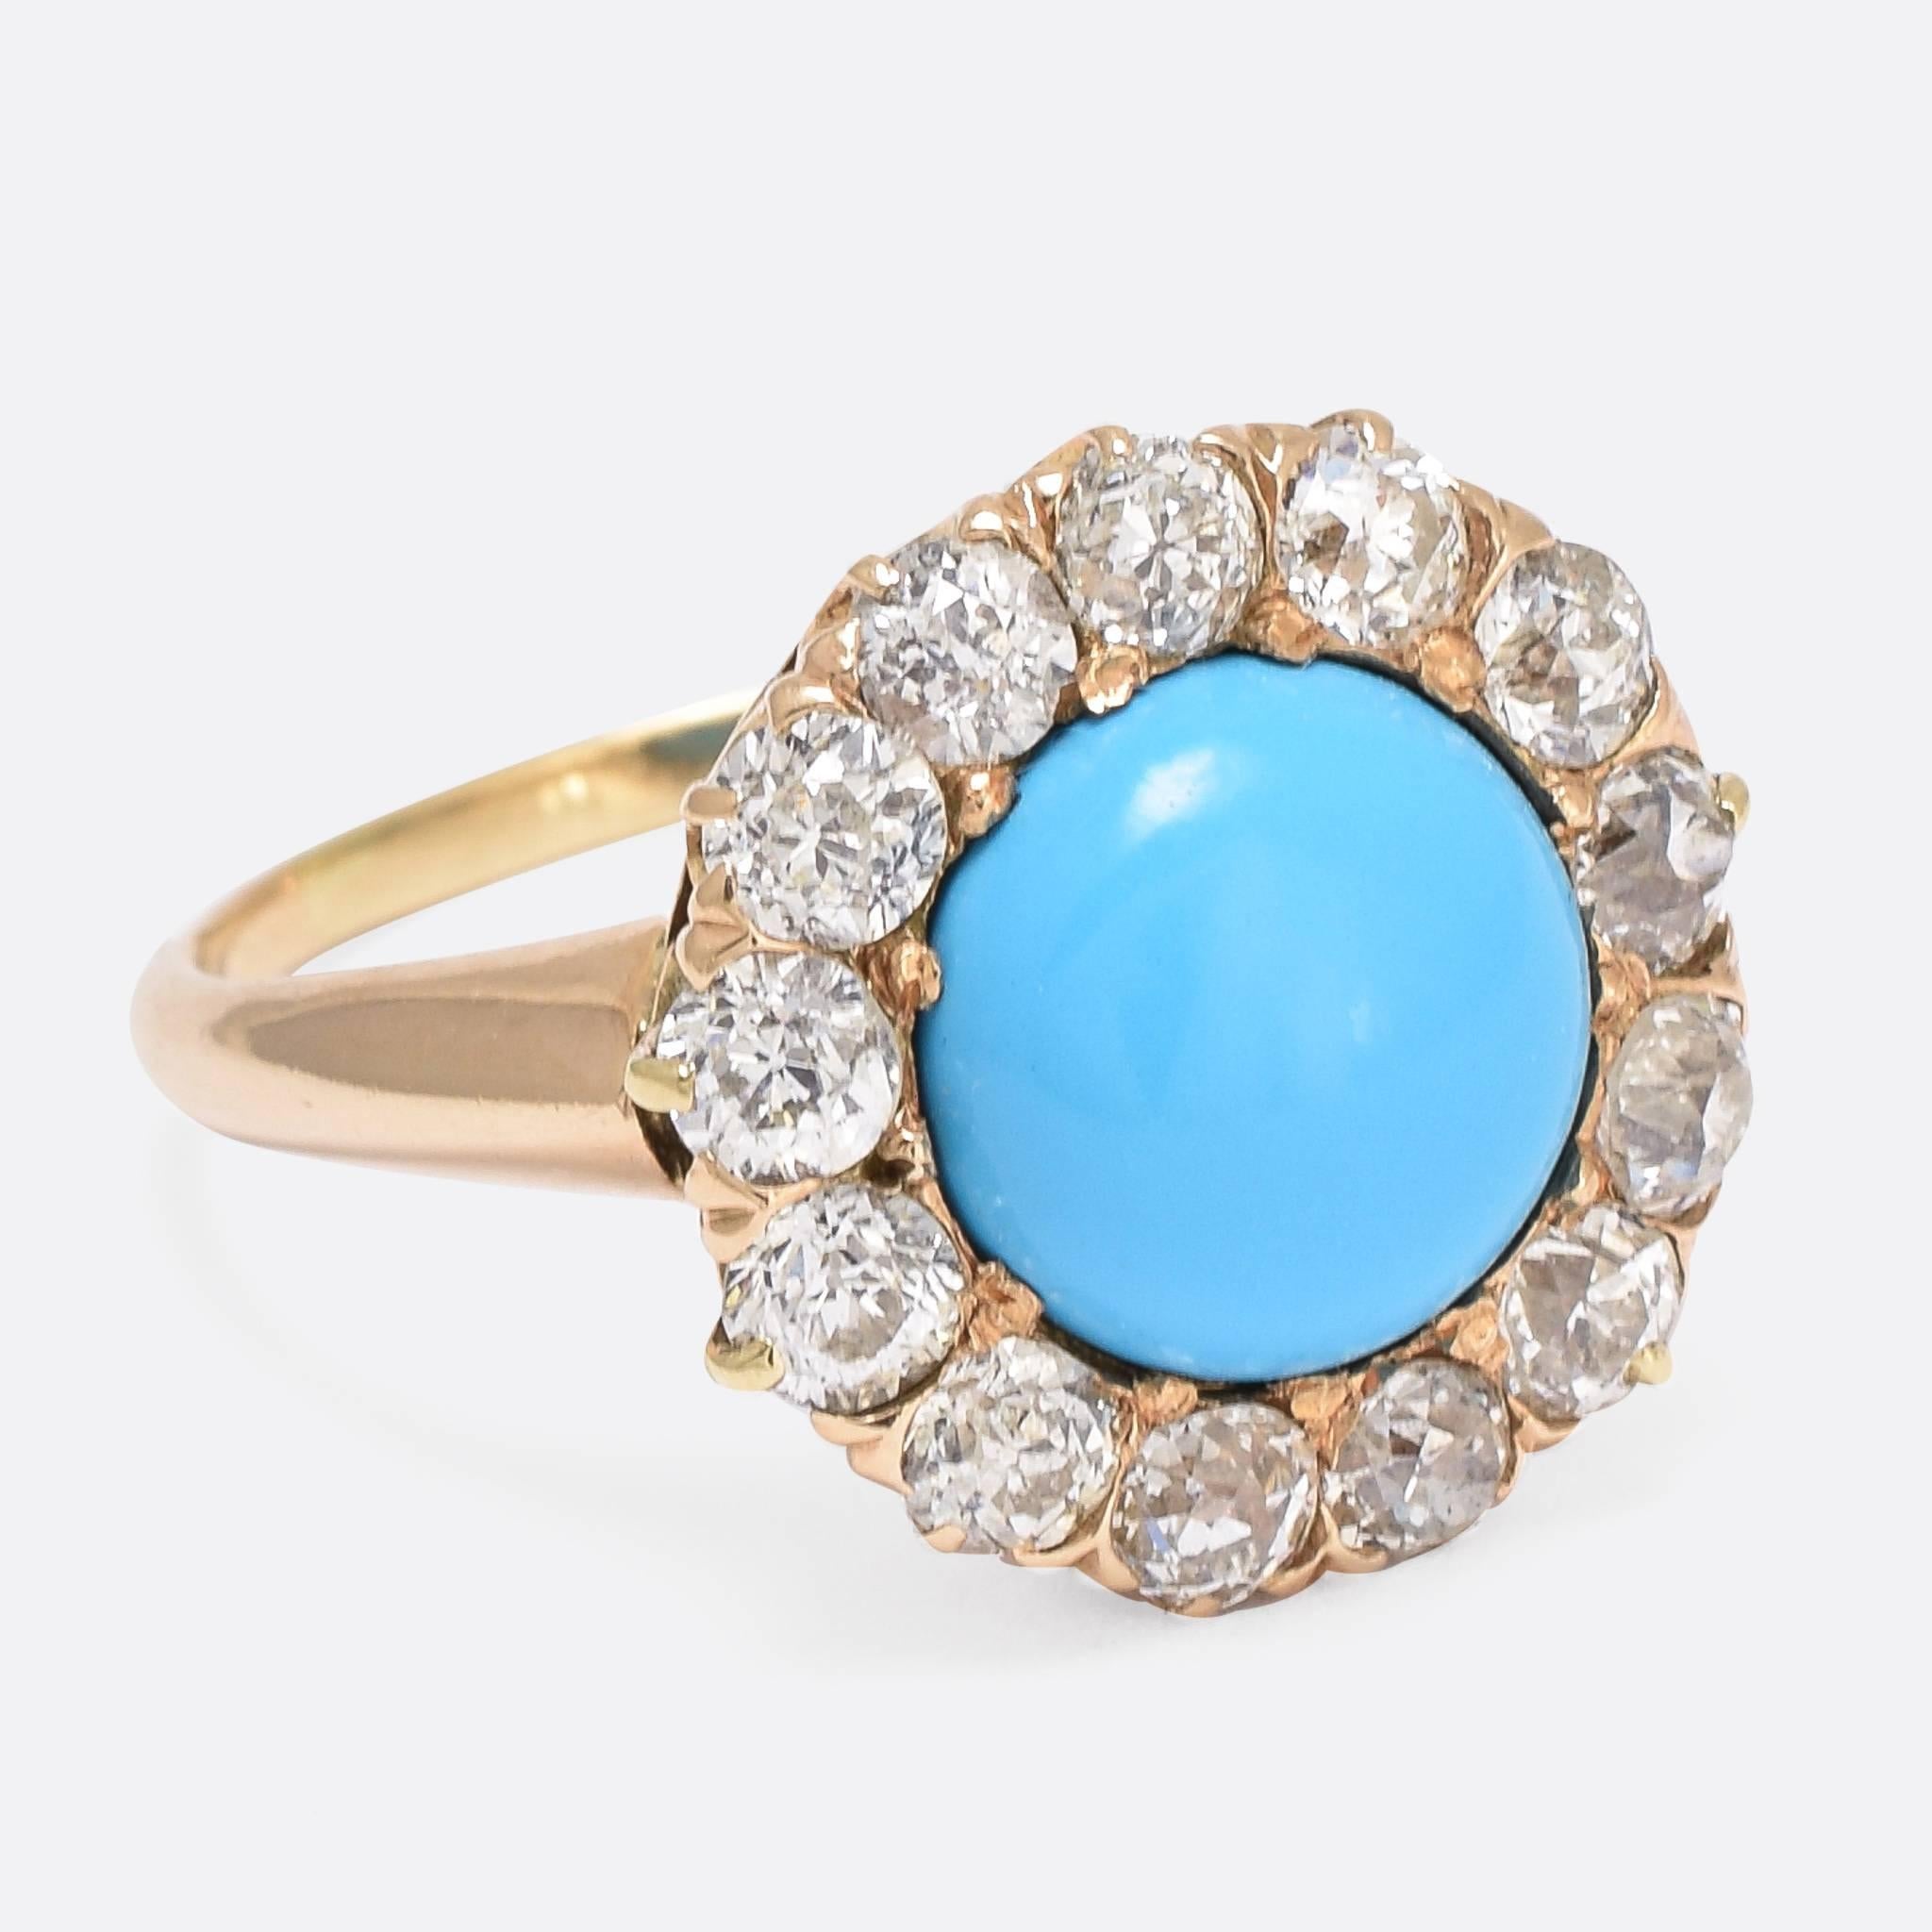 This superb antique round cluster ring is set with a principal Persian turquoise cabochon, surrounded by a halo of old cut diamonds. The piece dates to the late 19th Century, exceptionally well proportioned, with bright diamonds and a vivid